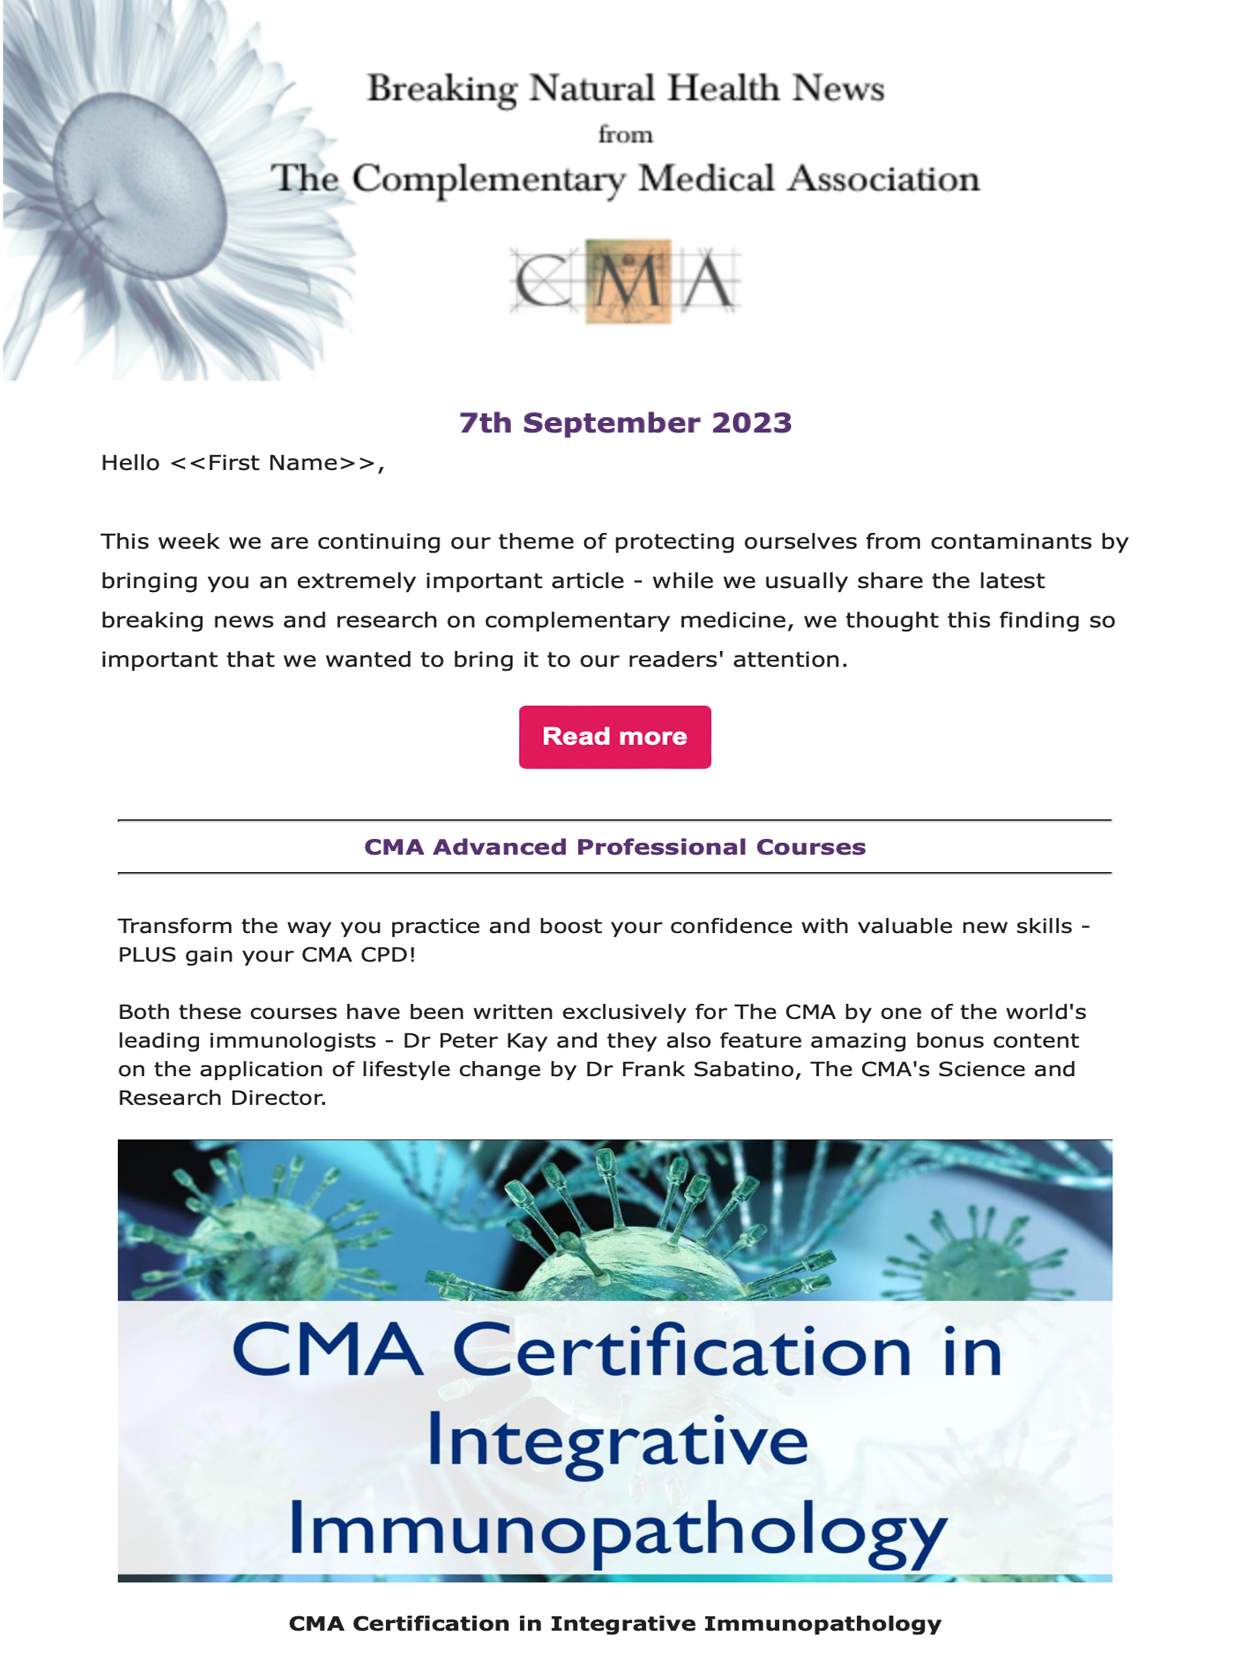 An example of The CMA weekly newsletter